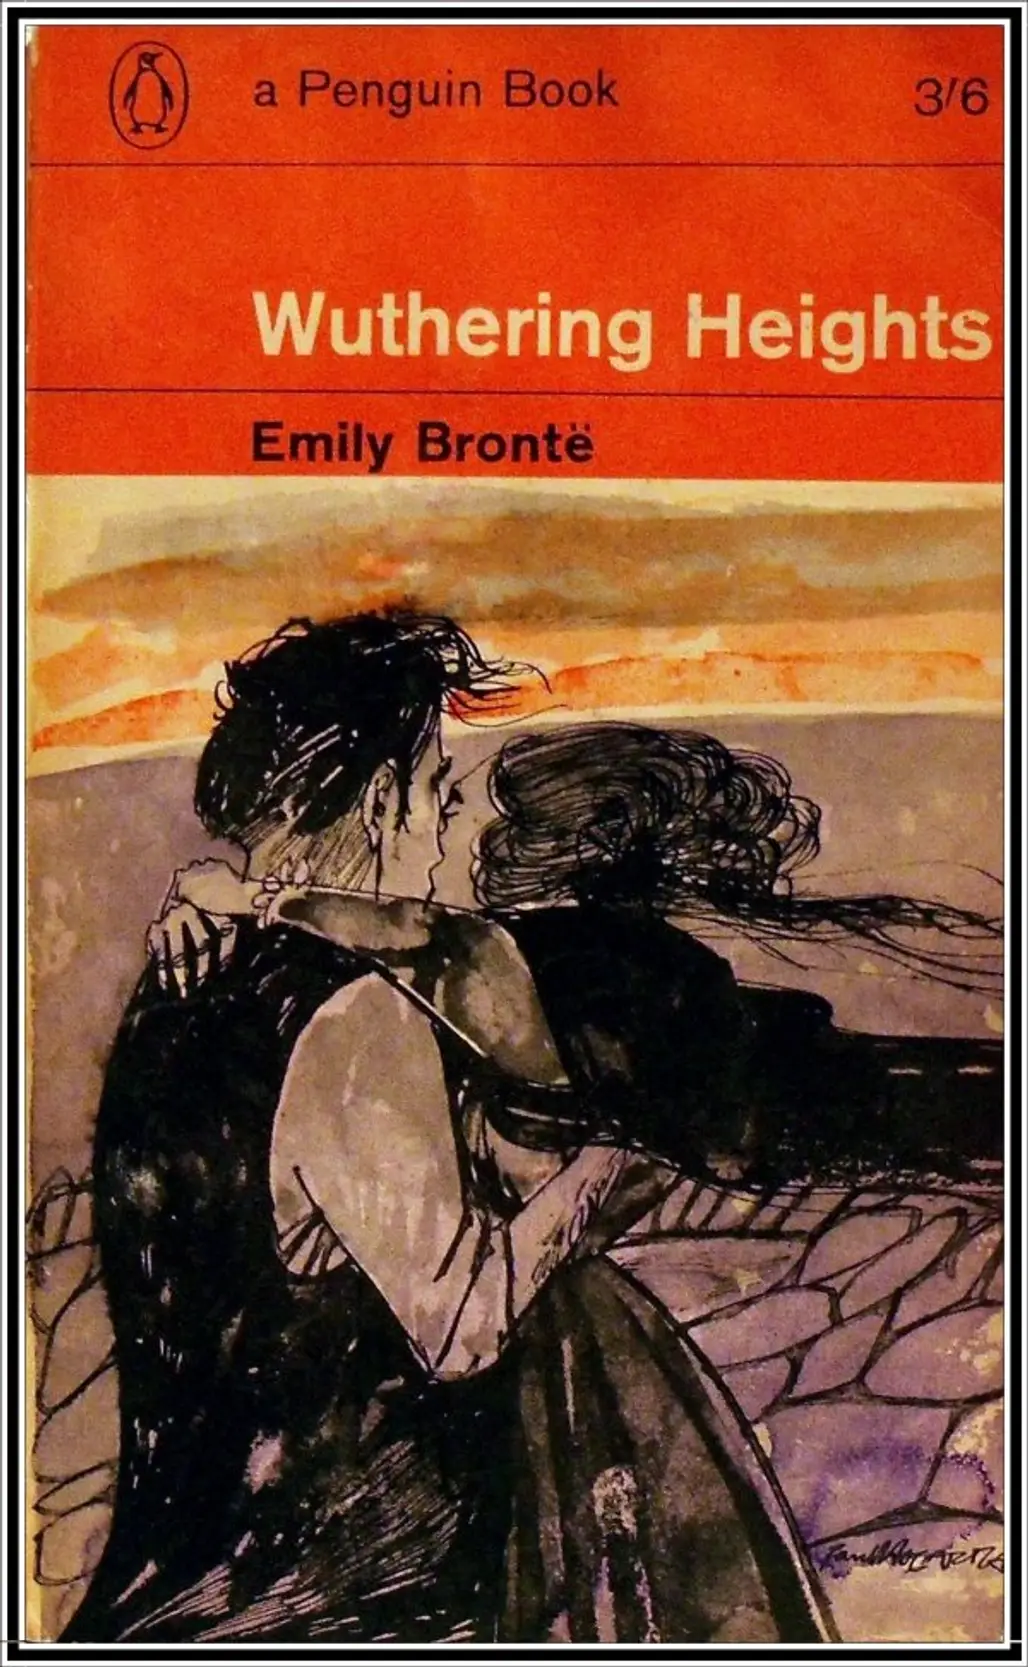 Wuthering Heights (Again) -Cathy